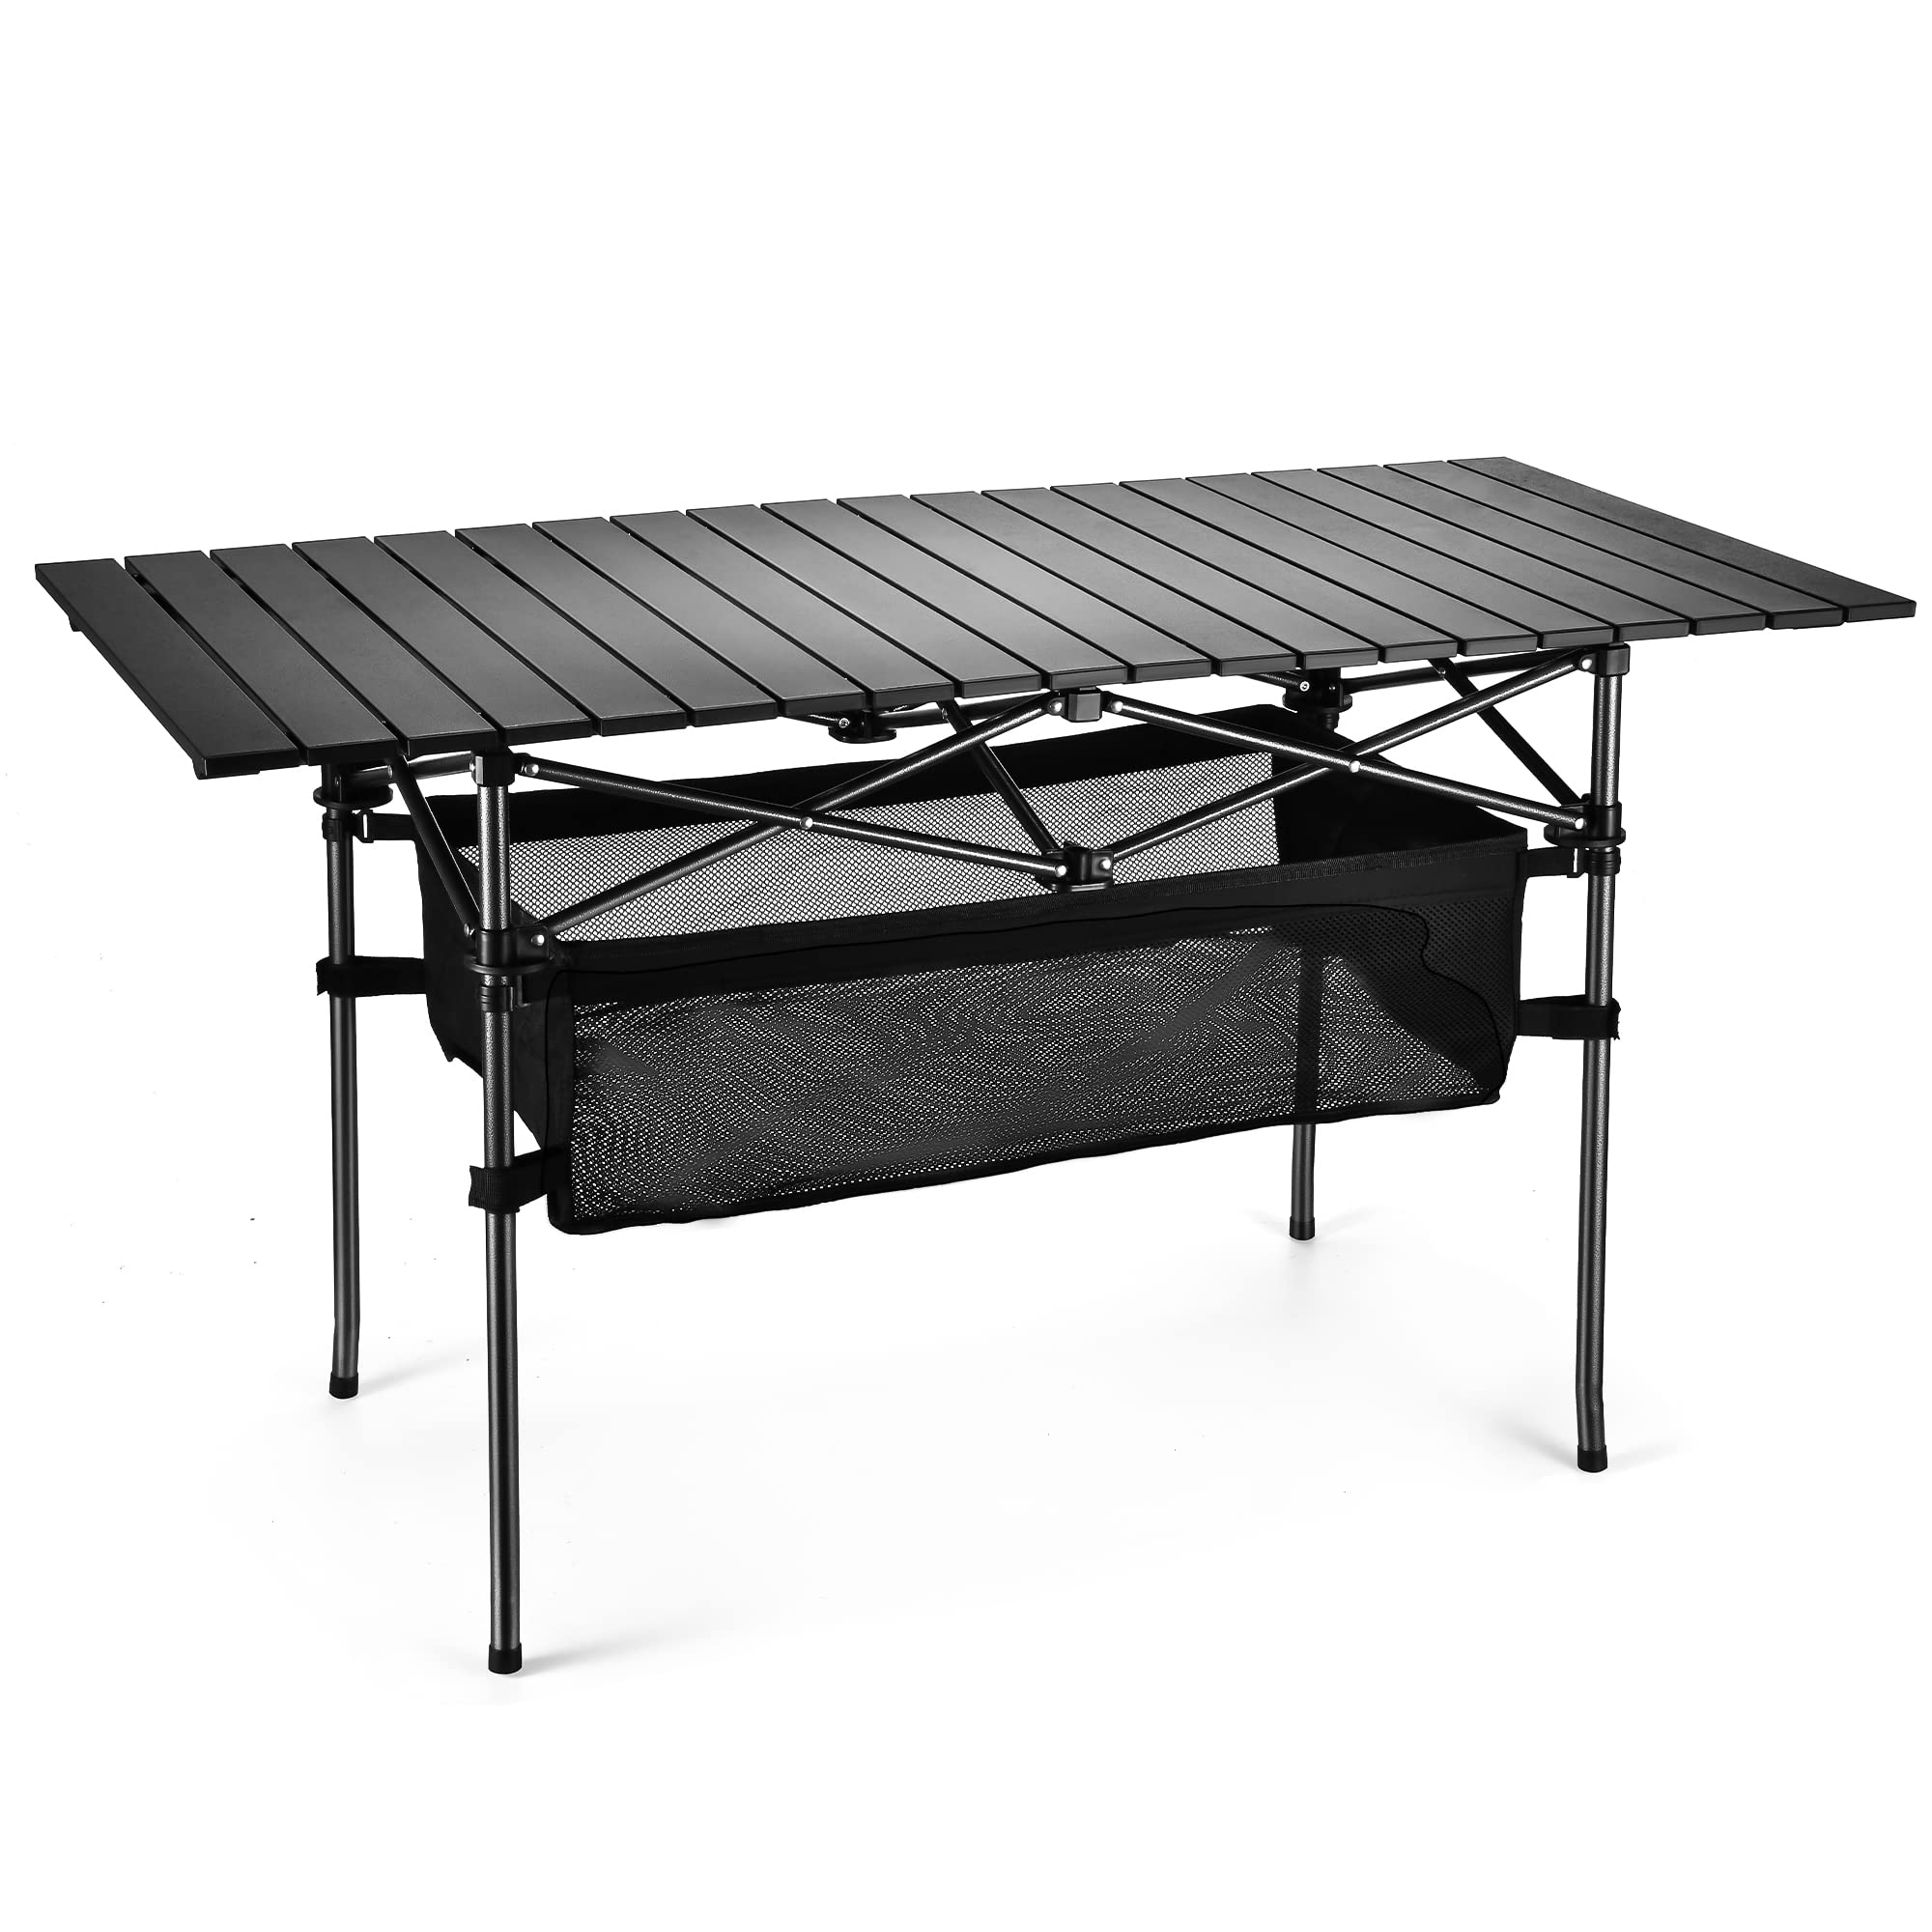 WUROMISE Sanny Outdoor Folding Portable Picnic Camping Table, Aluminum Roll-up Table with Easy Carrying Bag for Indoor,Outdoor,C